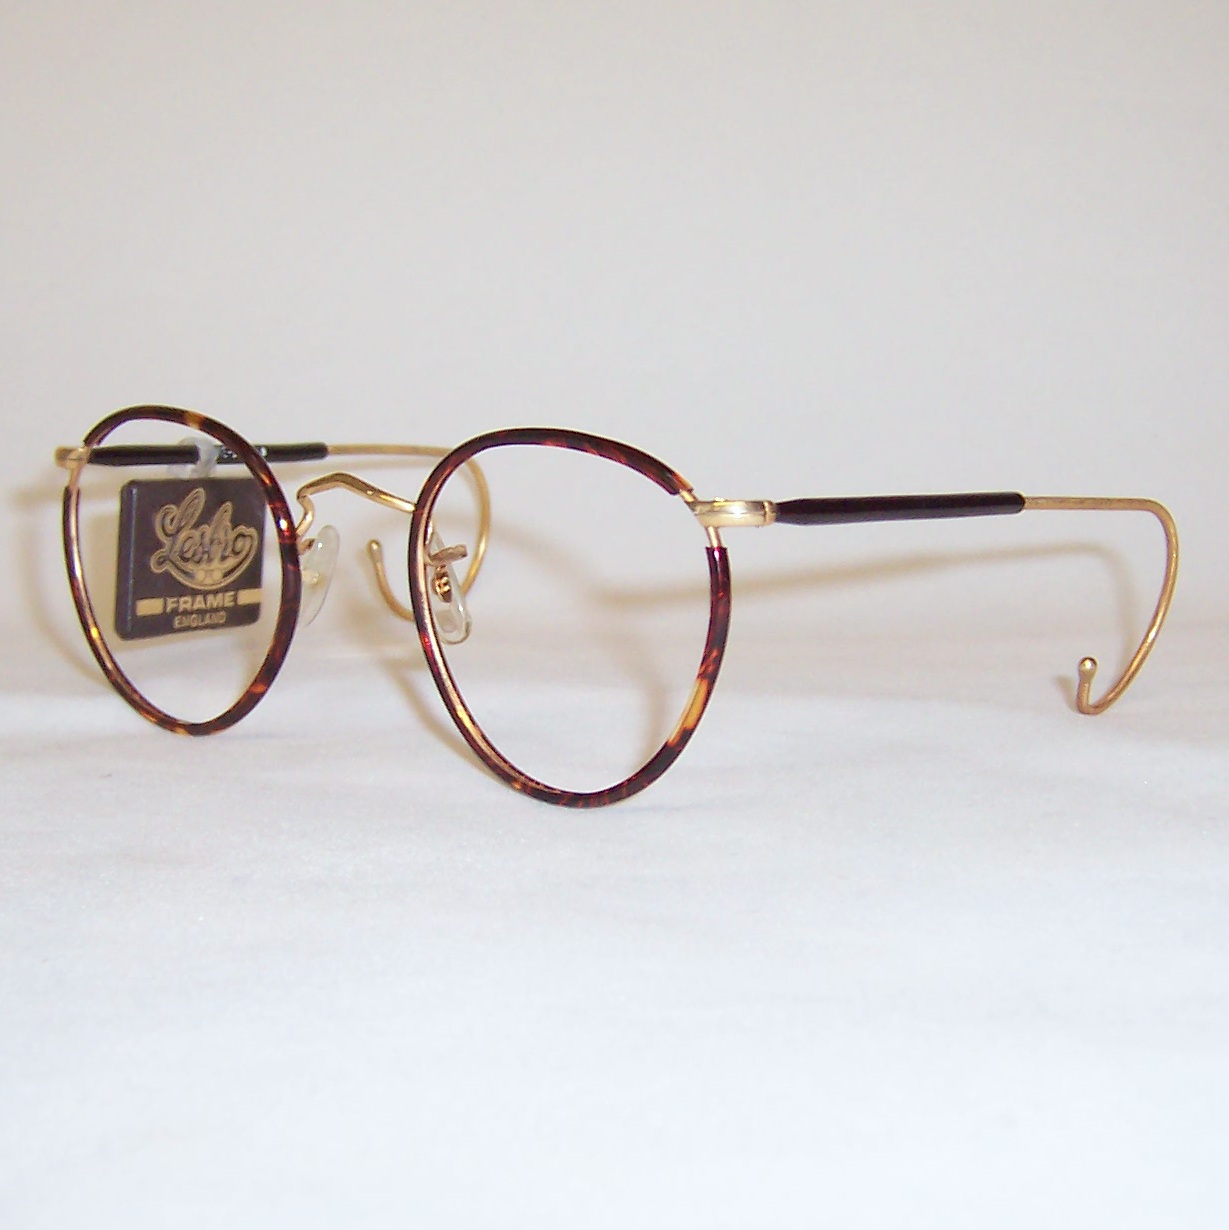 Classic 1970s gold/chestnut Beaufort Windsor spectacles by Lesbro ...